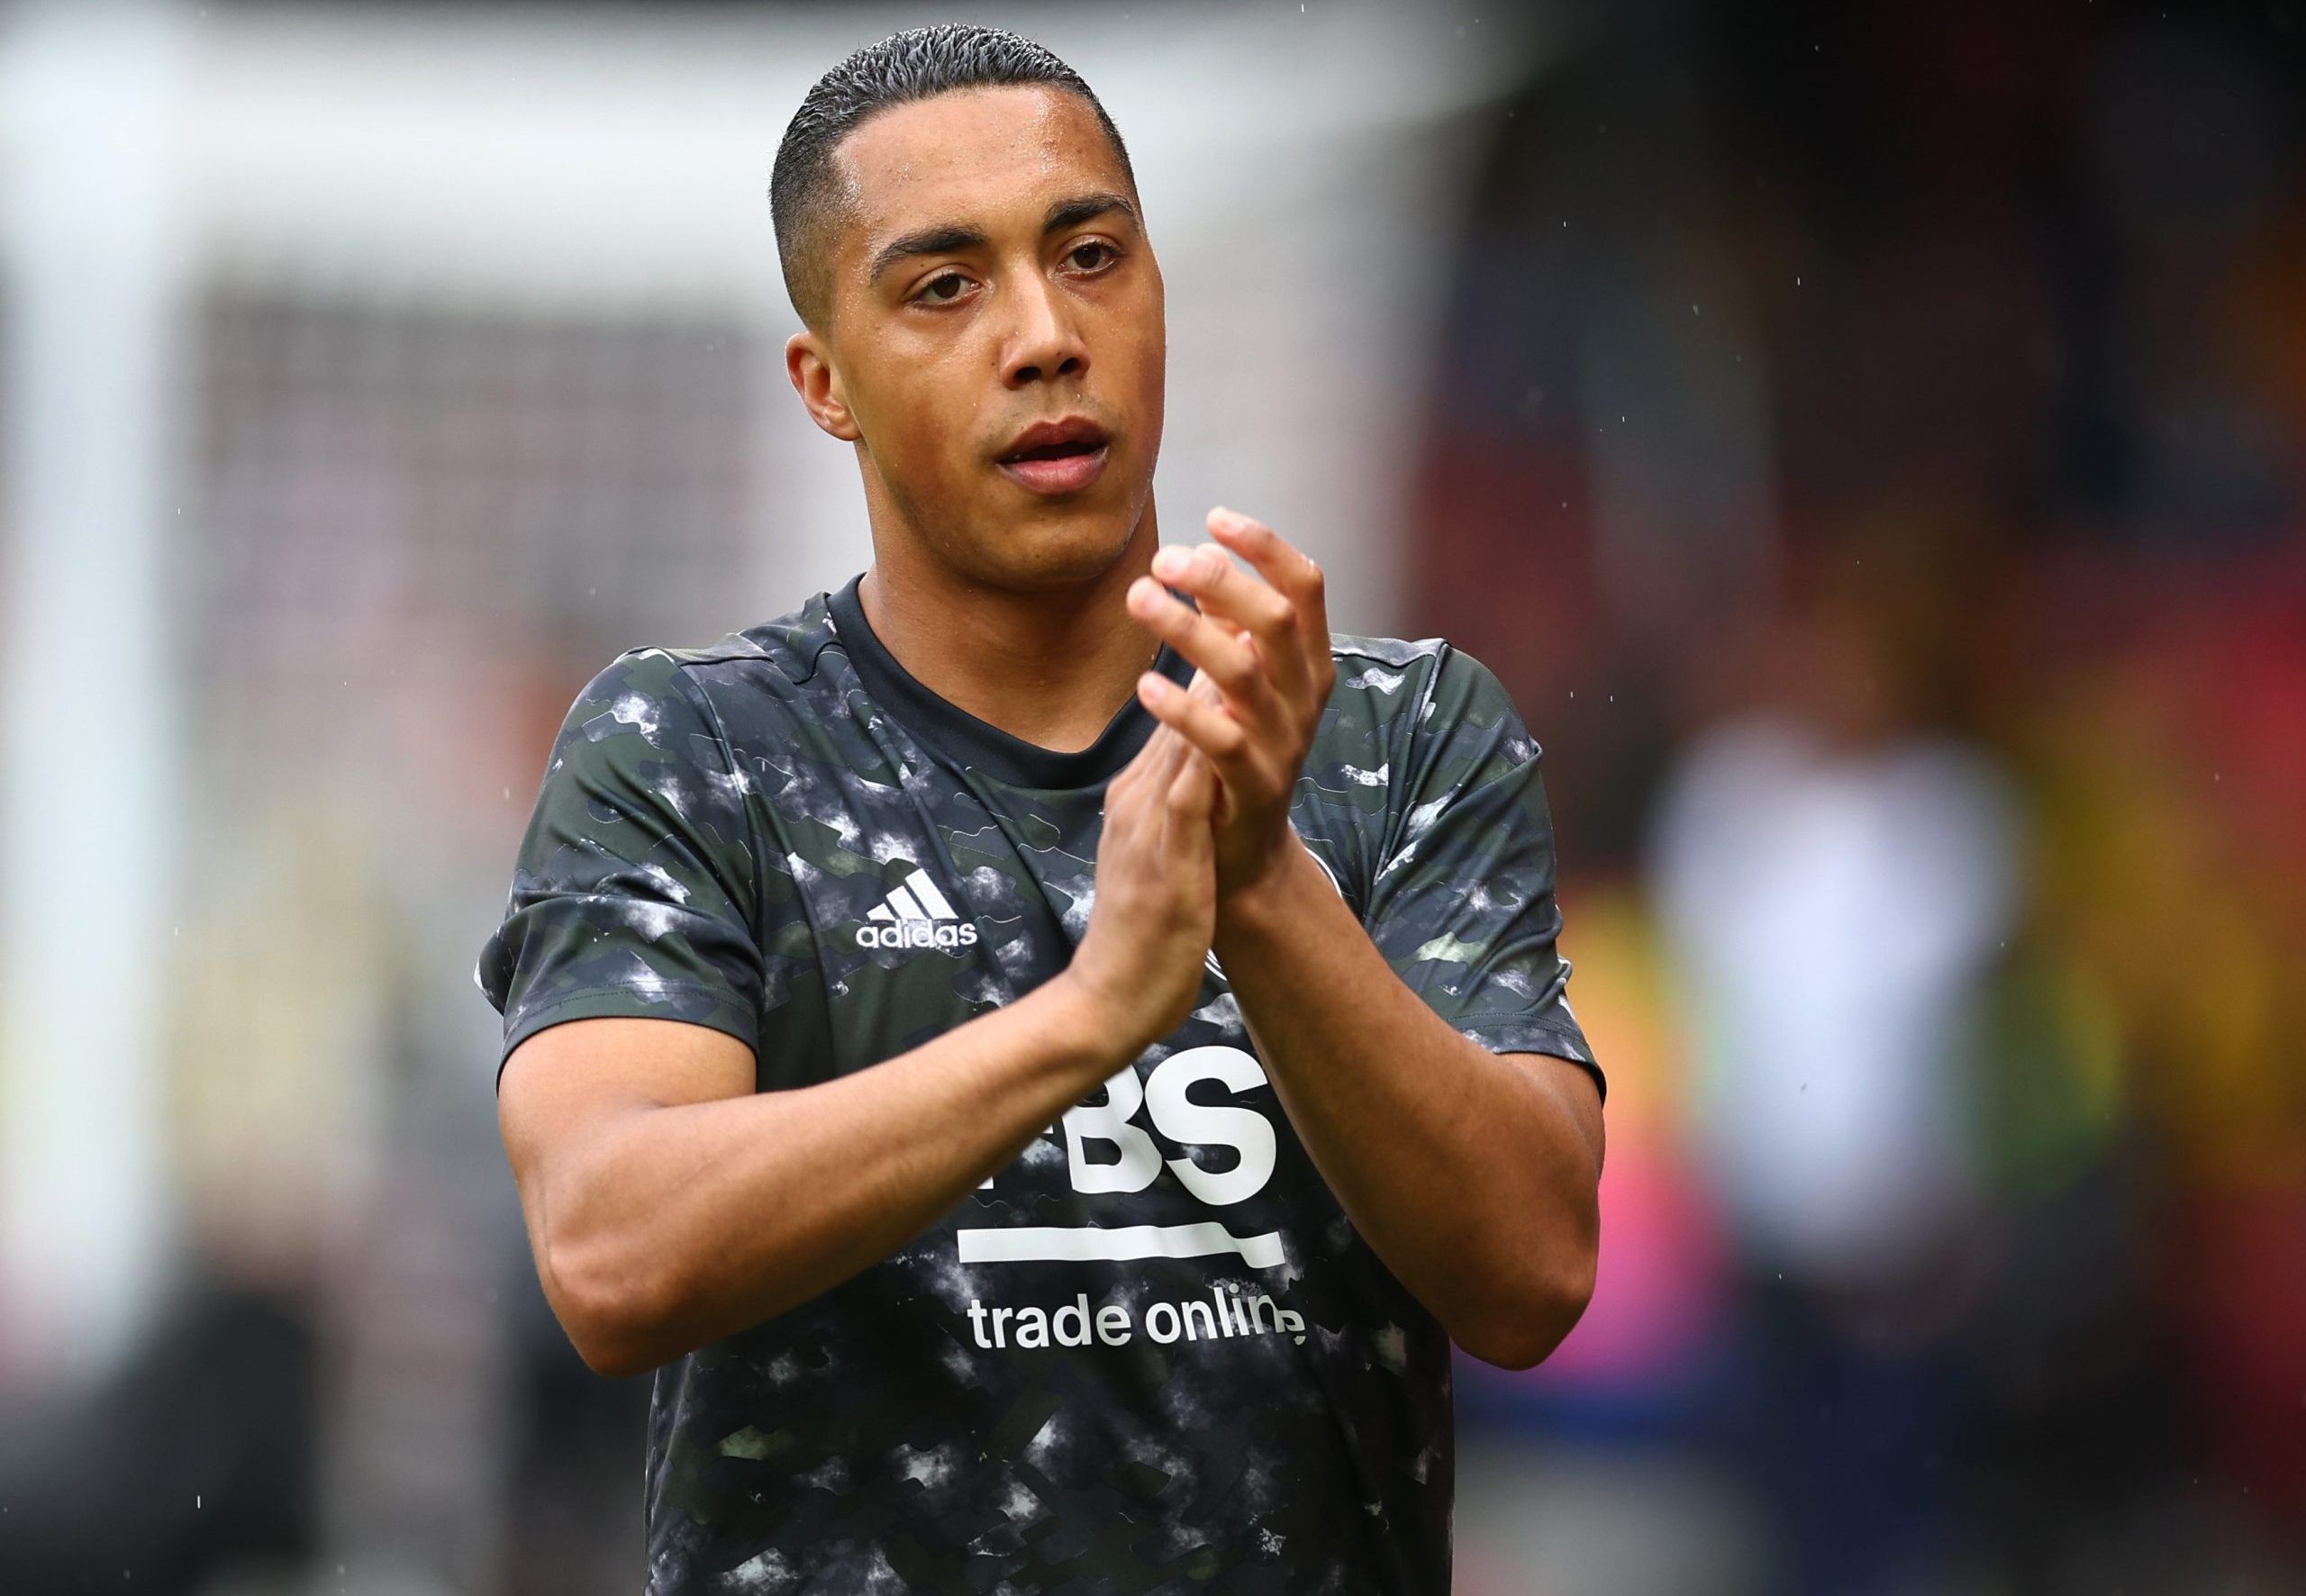 Youri-Tielemans-Leicester-City-Manchester-United-Transfer-Deal